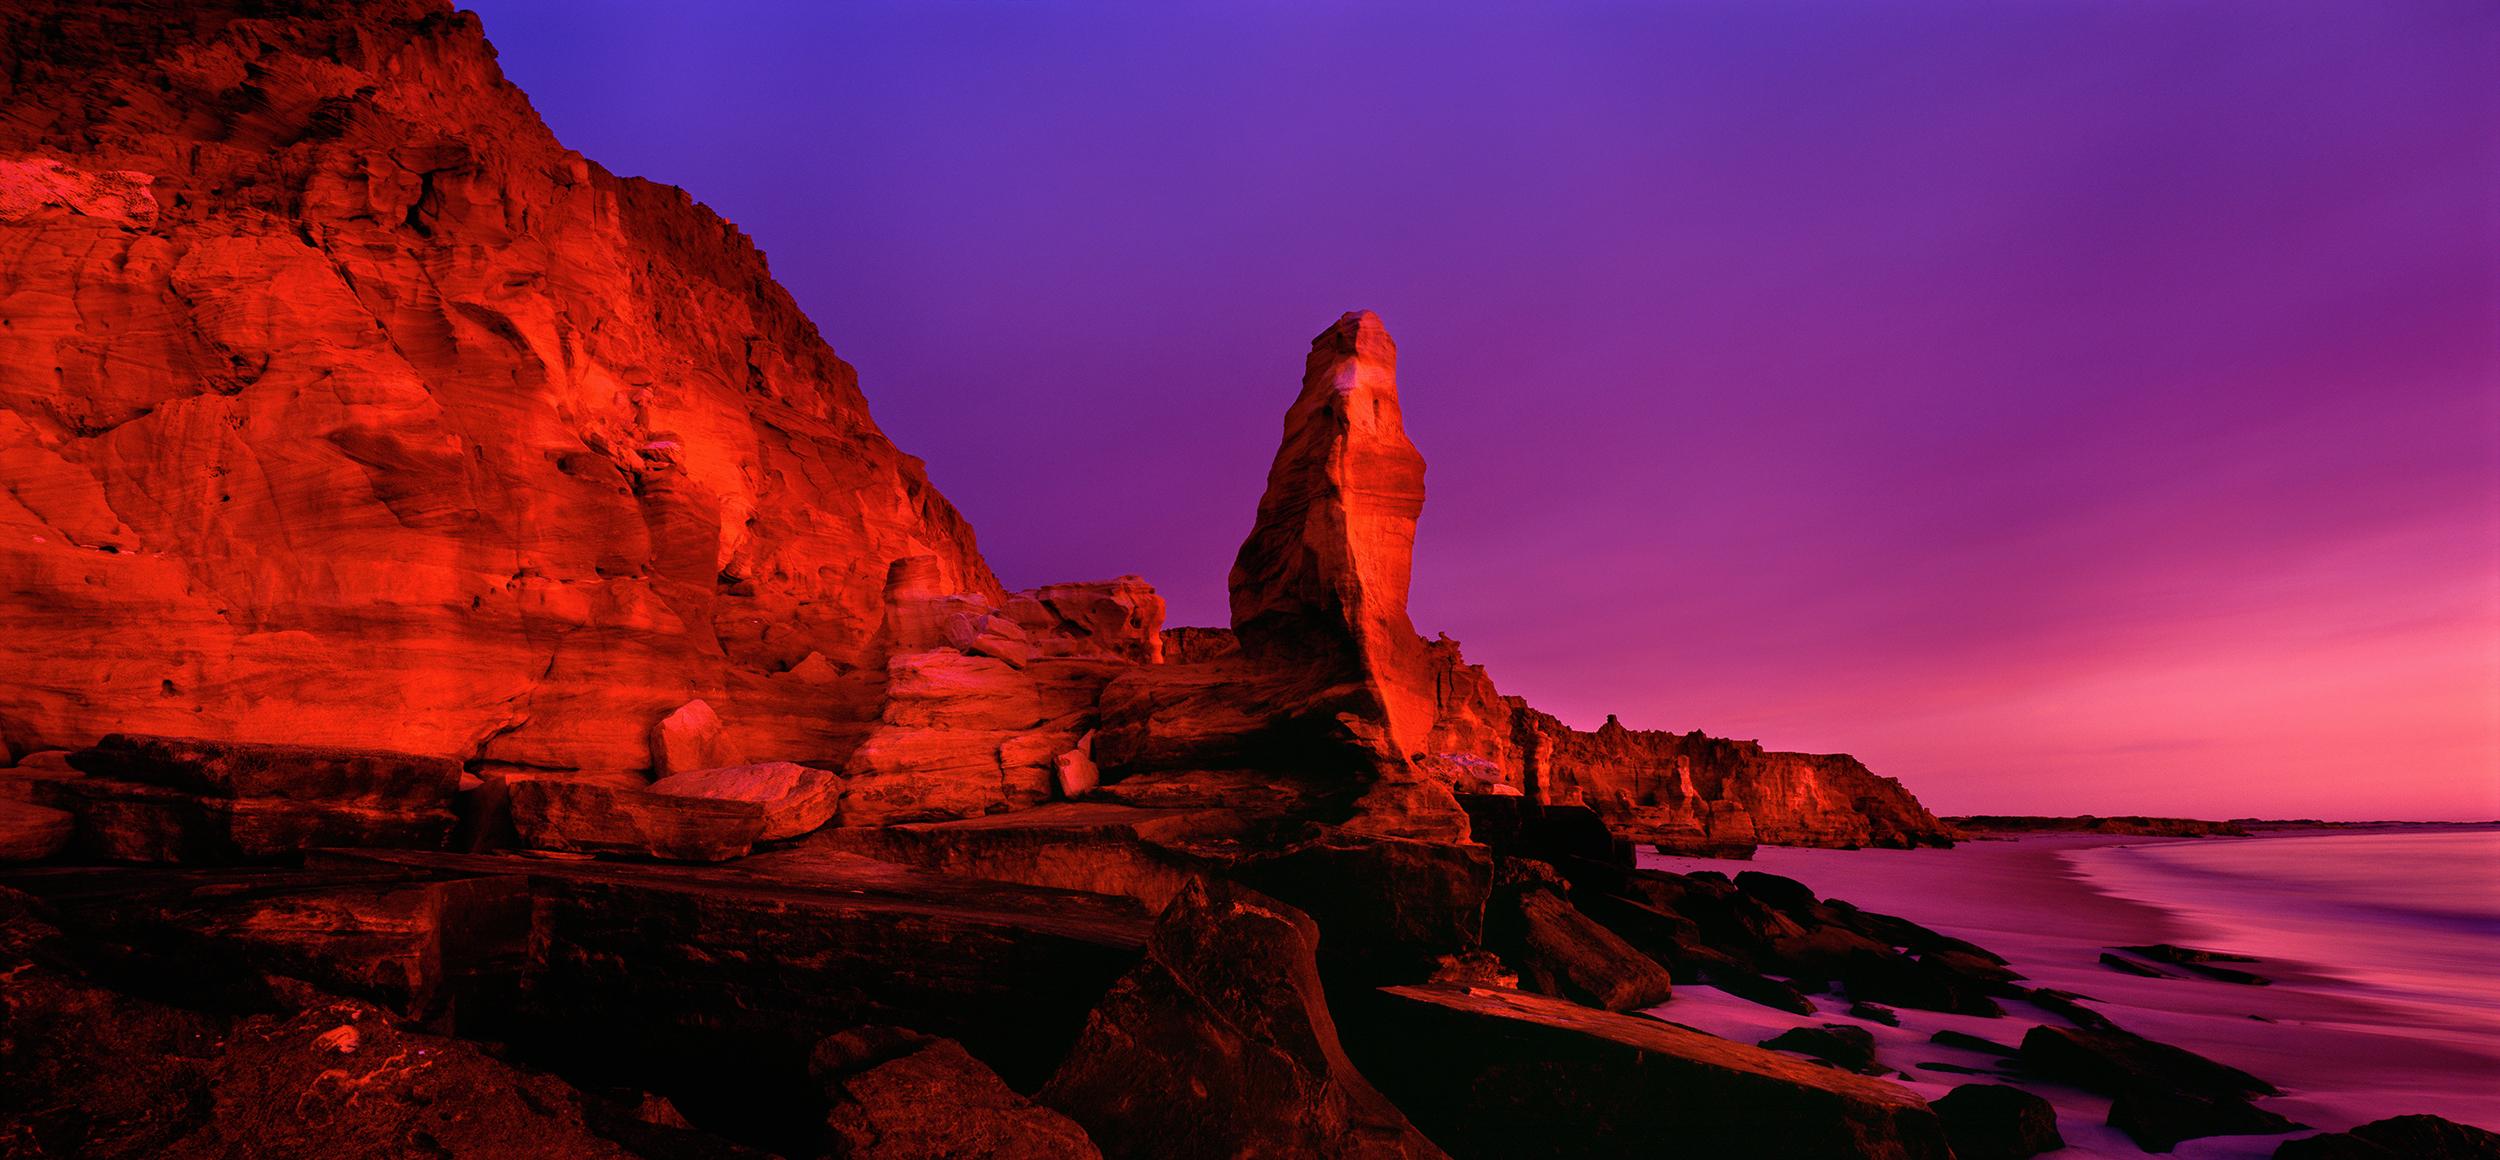  Spectacular Afterglow, Cape Leveque, Kimberley, Western Australia, 2008.&nbsp; Edition of 3. 